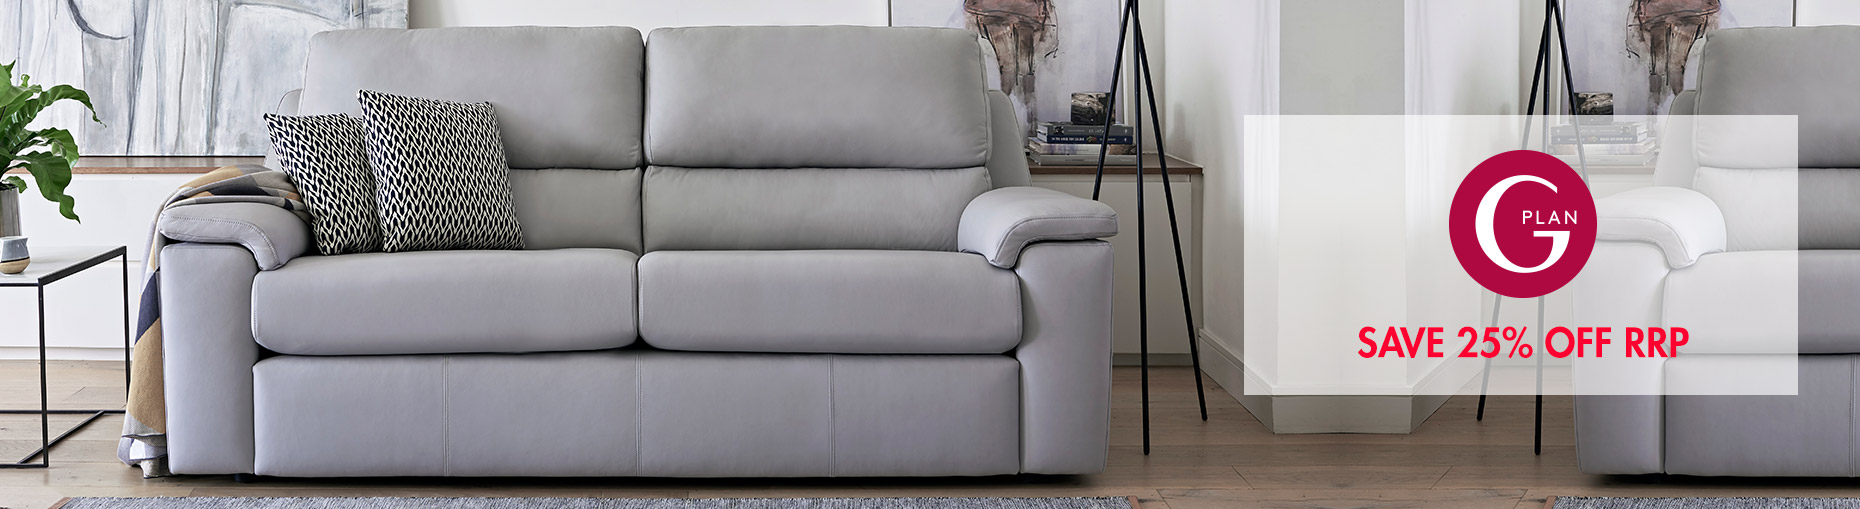 G Plan Upholstery Sofa collections at Forrest Furnishing